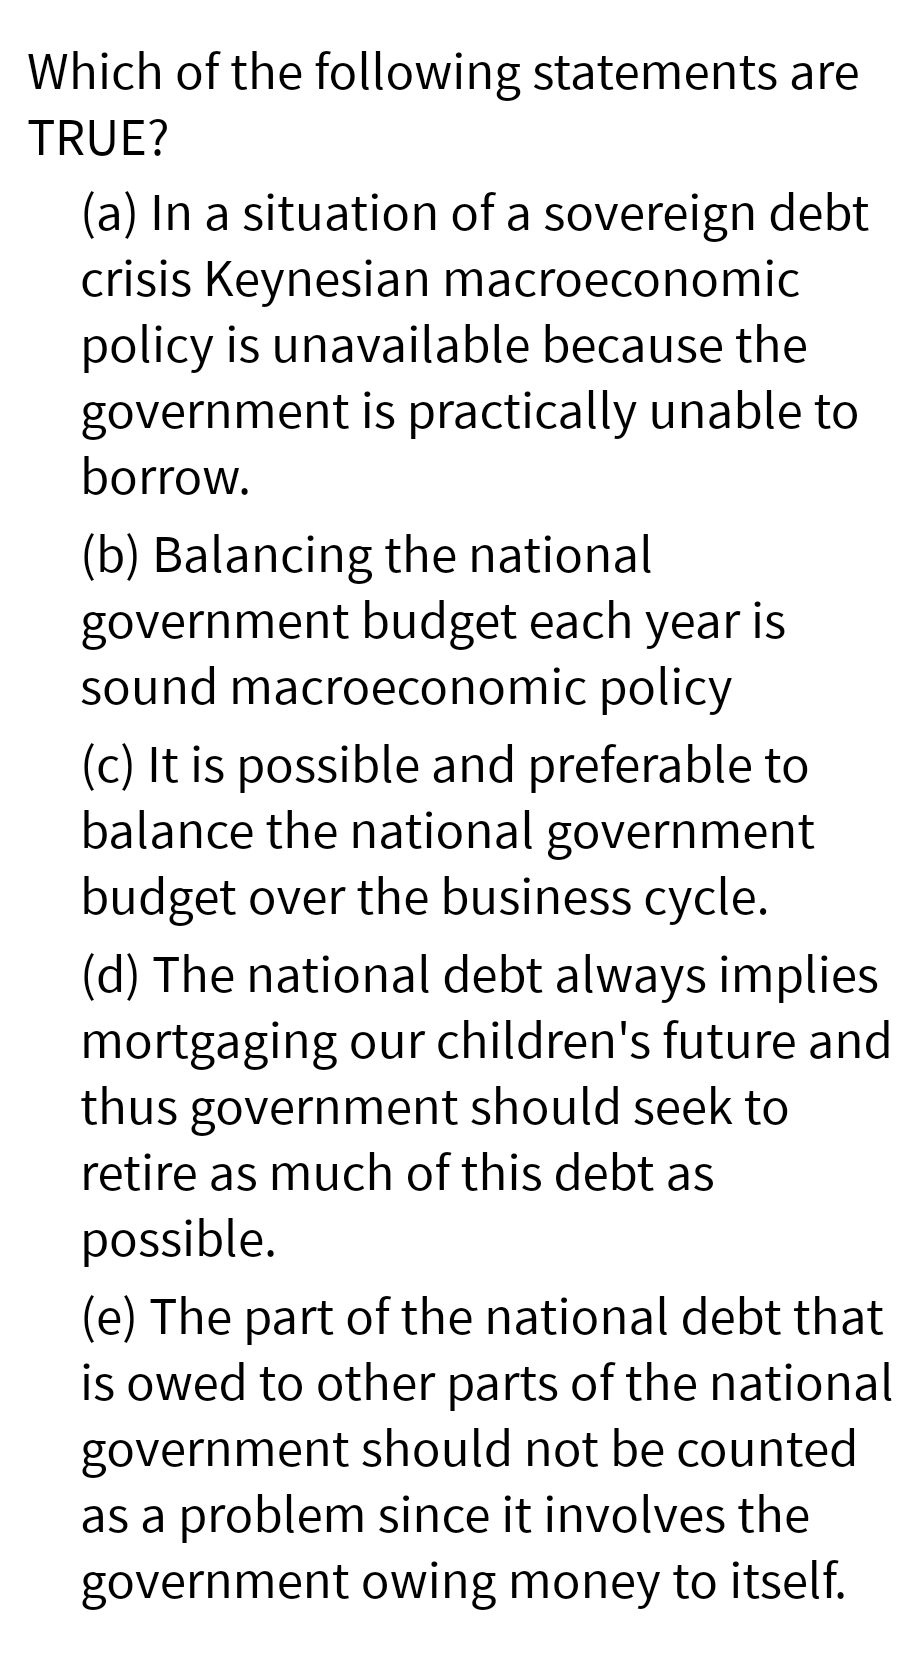 Which of the following statements are
TRUE?
(a) In a situation of a sovereign debt
crisis Keynesian macroeconomic
policy is unavailable because the
government is practically unable to
borrow.
(b) Balancing the national
government budget each year is
sound macroeconomic policy
(c) It is possible and preferable to
balance the national government
budget over the business cycle.
(d) The national debt always implies
mortgaging our children's future and
thus government should seek to
retire as much of this debt as
possible.
(e) The part of the national debt that
is owed to other parts of the national
government should not be counted
as a problem since it involves the
government owing money to itself.